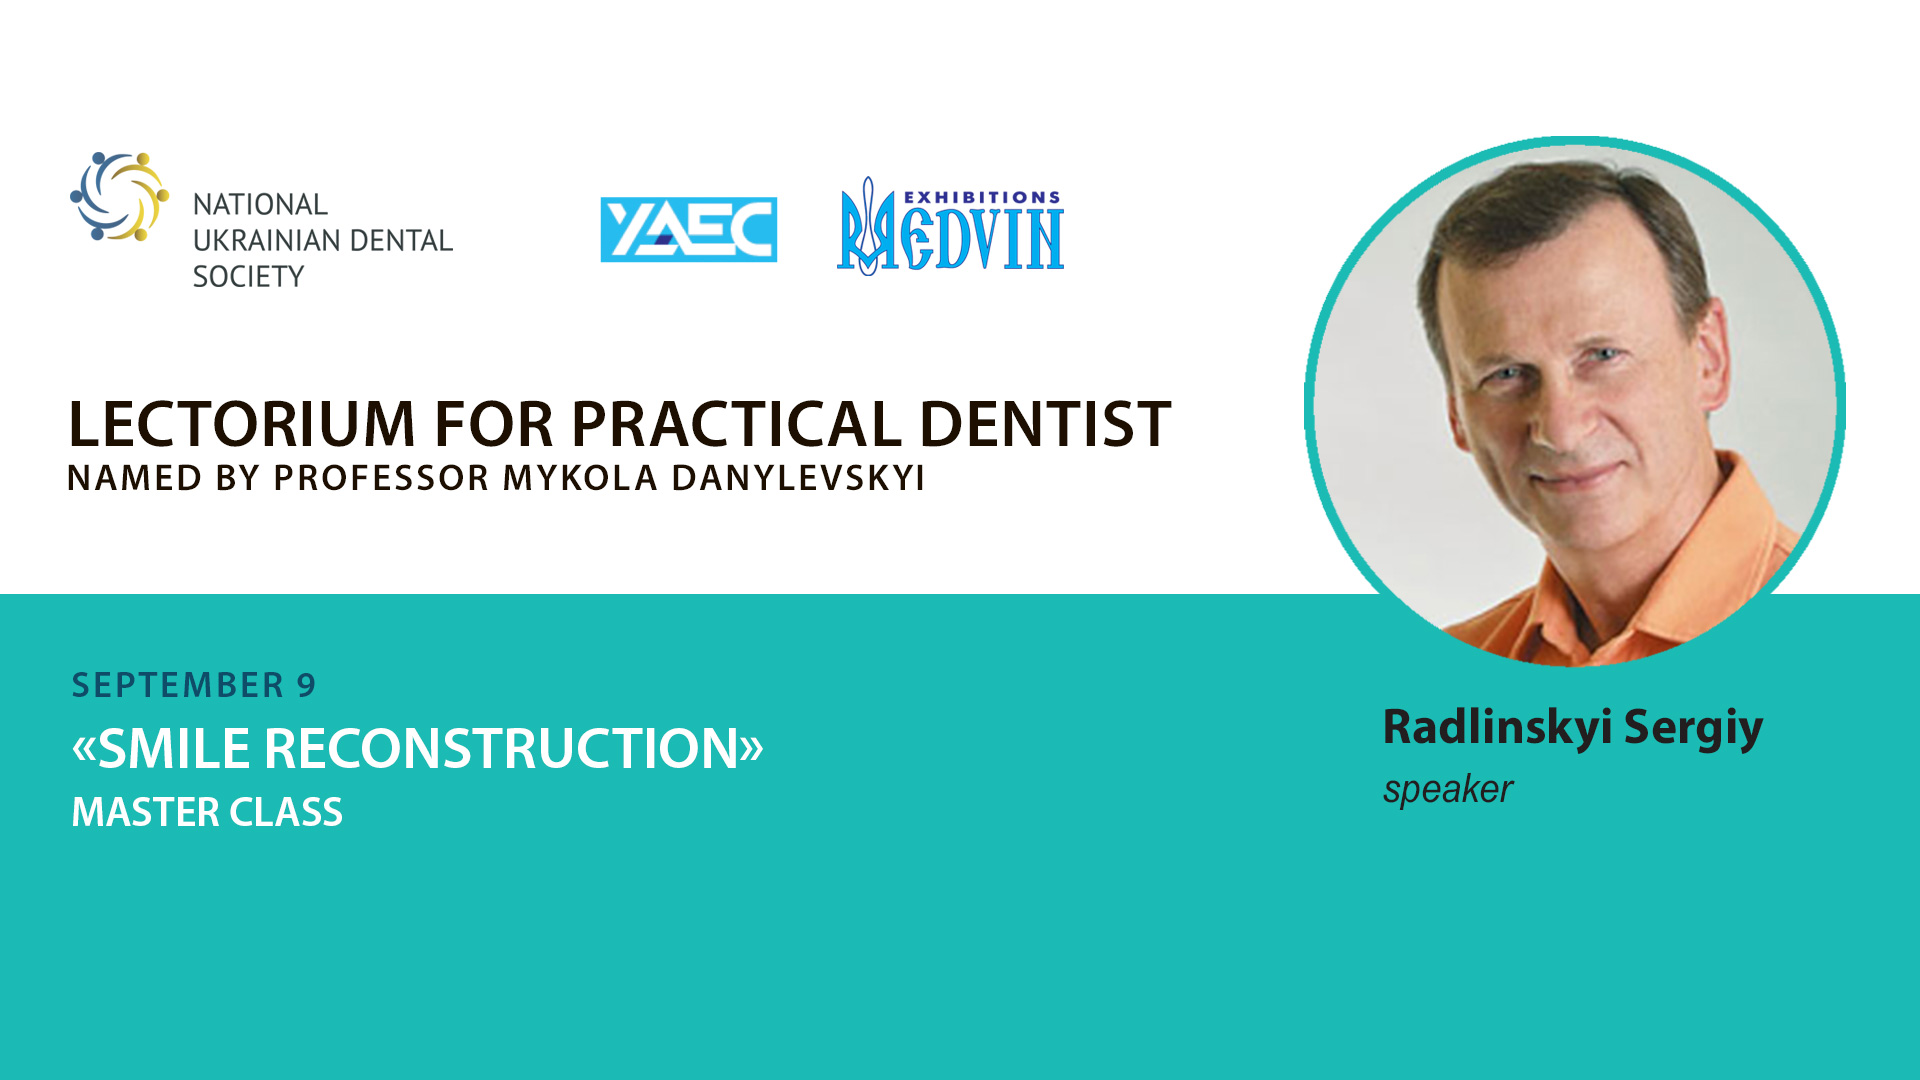 Master-class by Sergiy Radlinskyi "Tooth renewal  in occlusion"